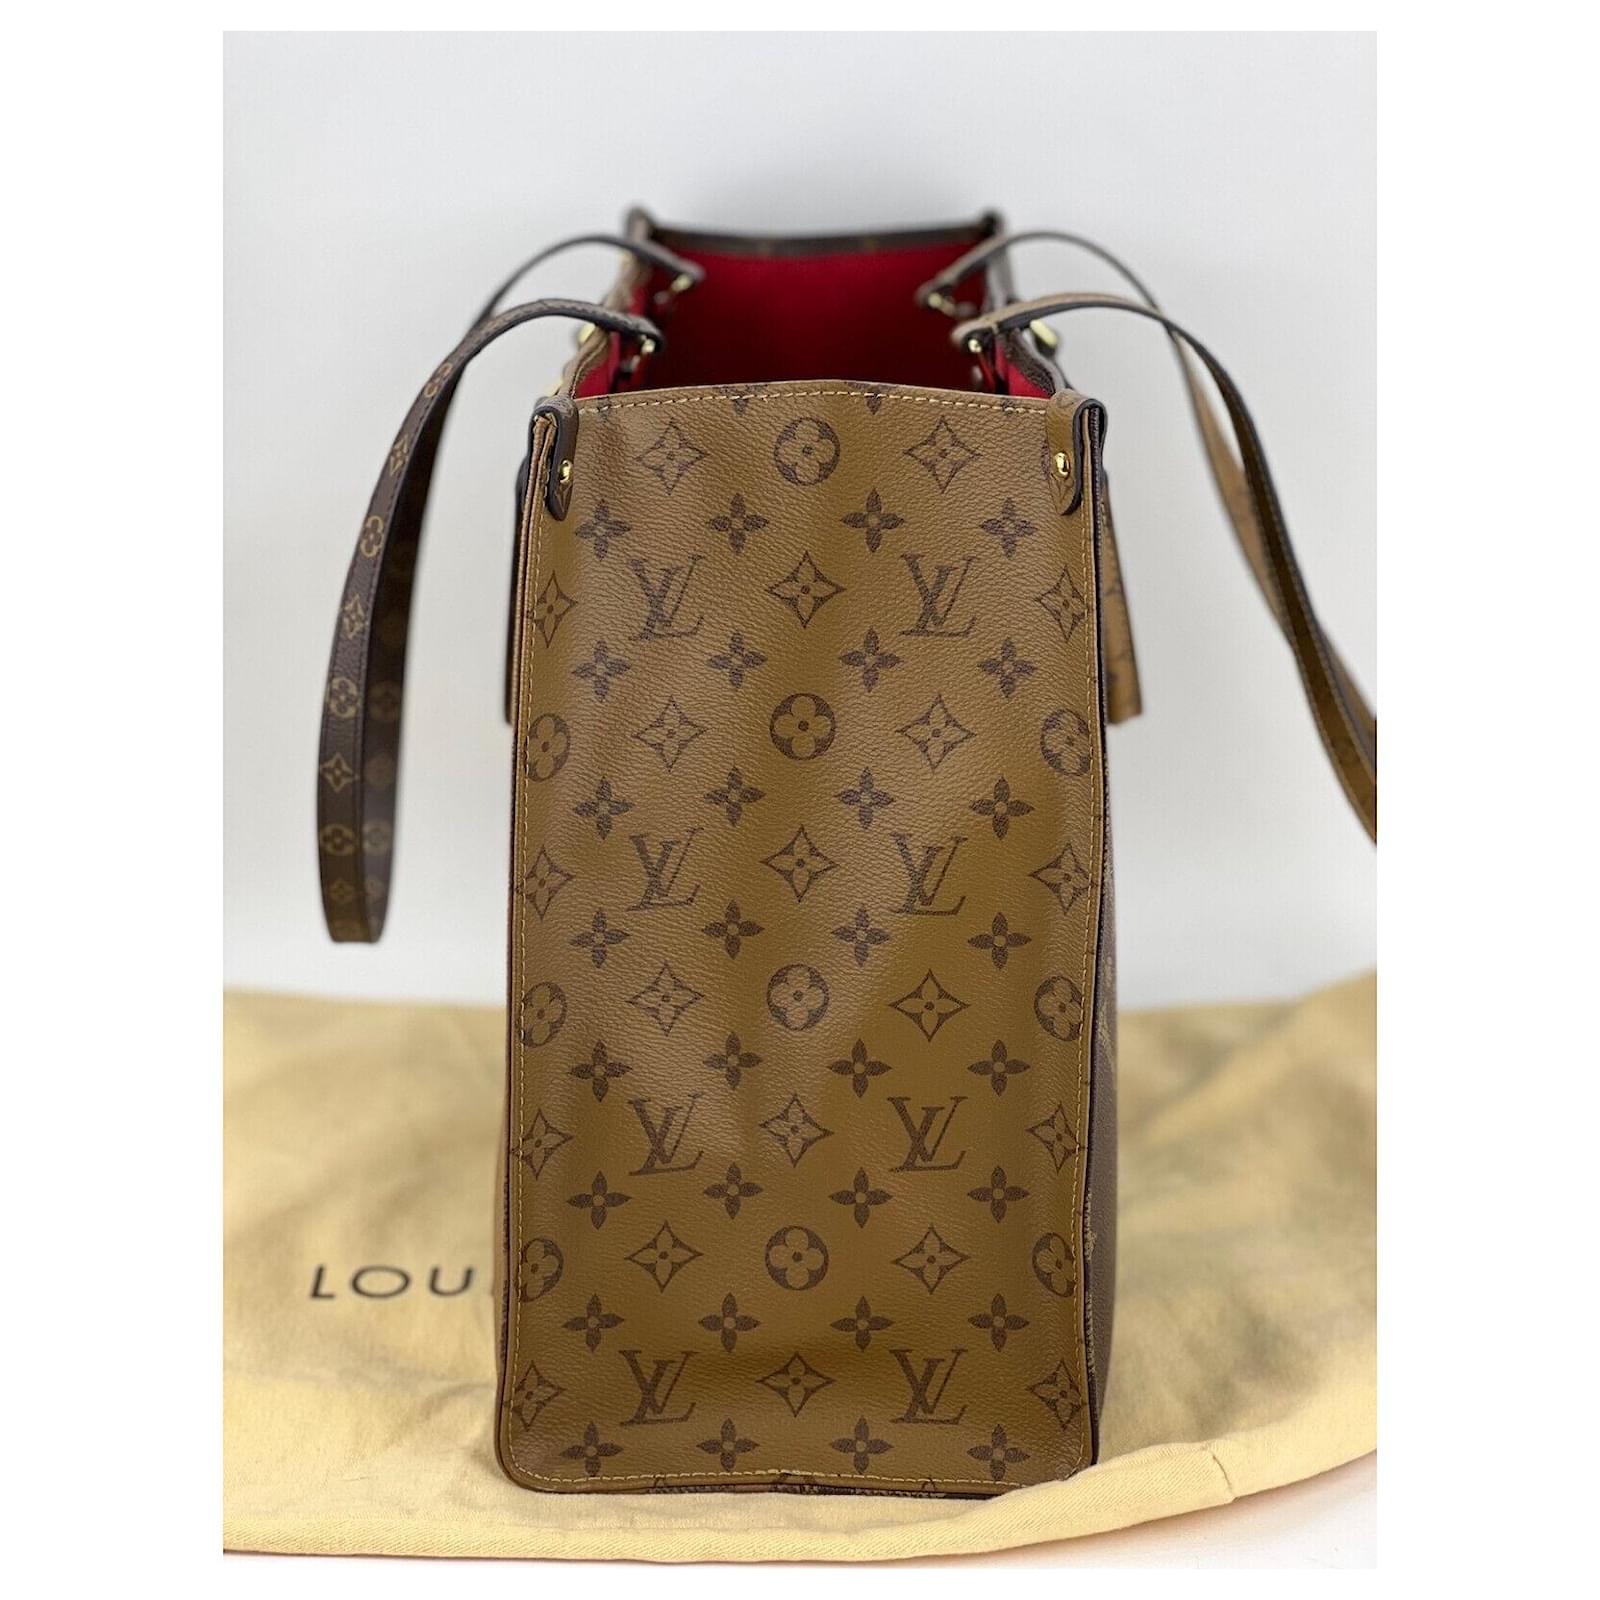 Louis Vuitton Tote OntheGo GM Bag Giant Reverse Monogram Tote Bag Added  Insert